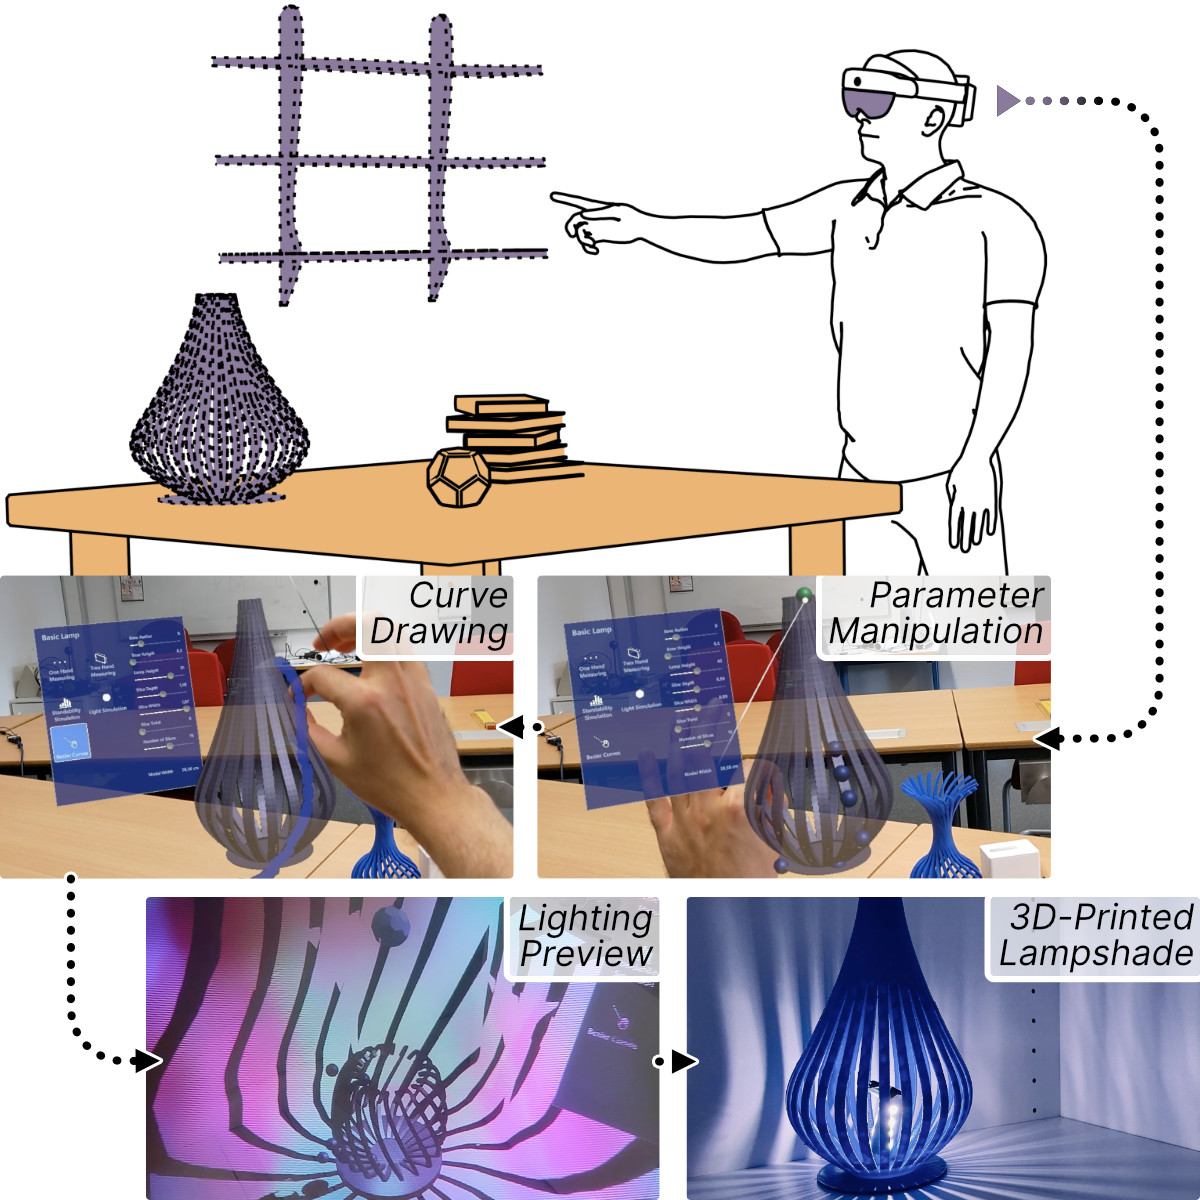 Thumbnail for pARam: Leveraging Parametric Design in Extended Reality to Support the Personalization of Artifacts for Personal Fabrication